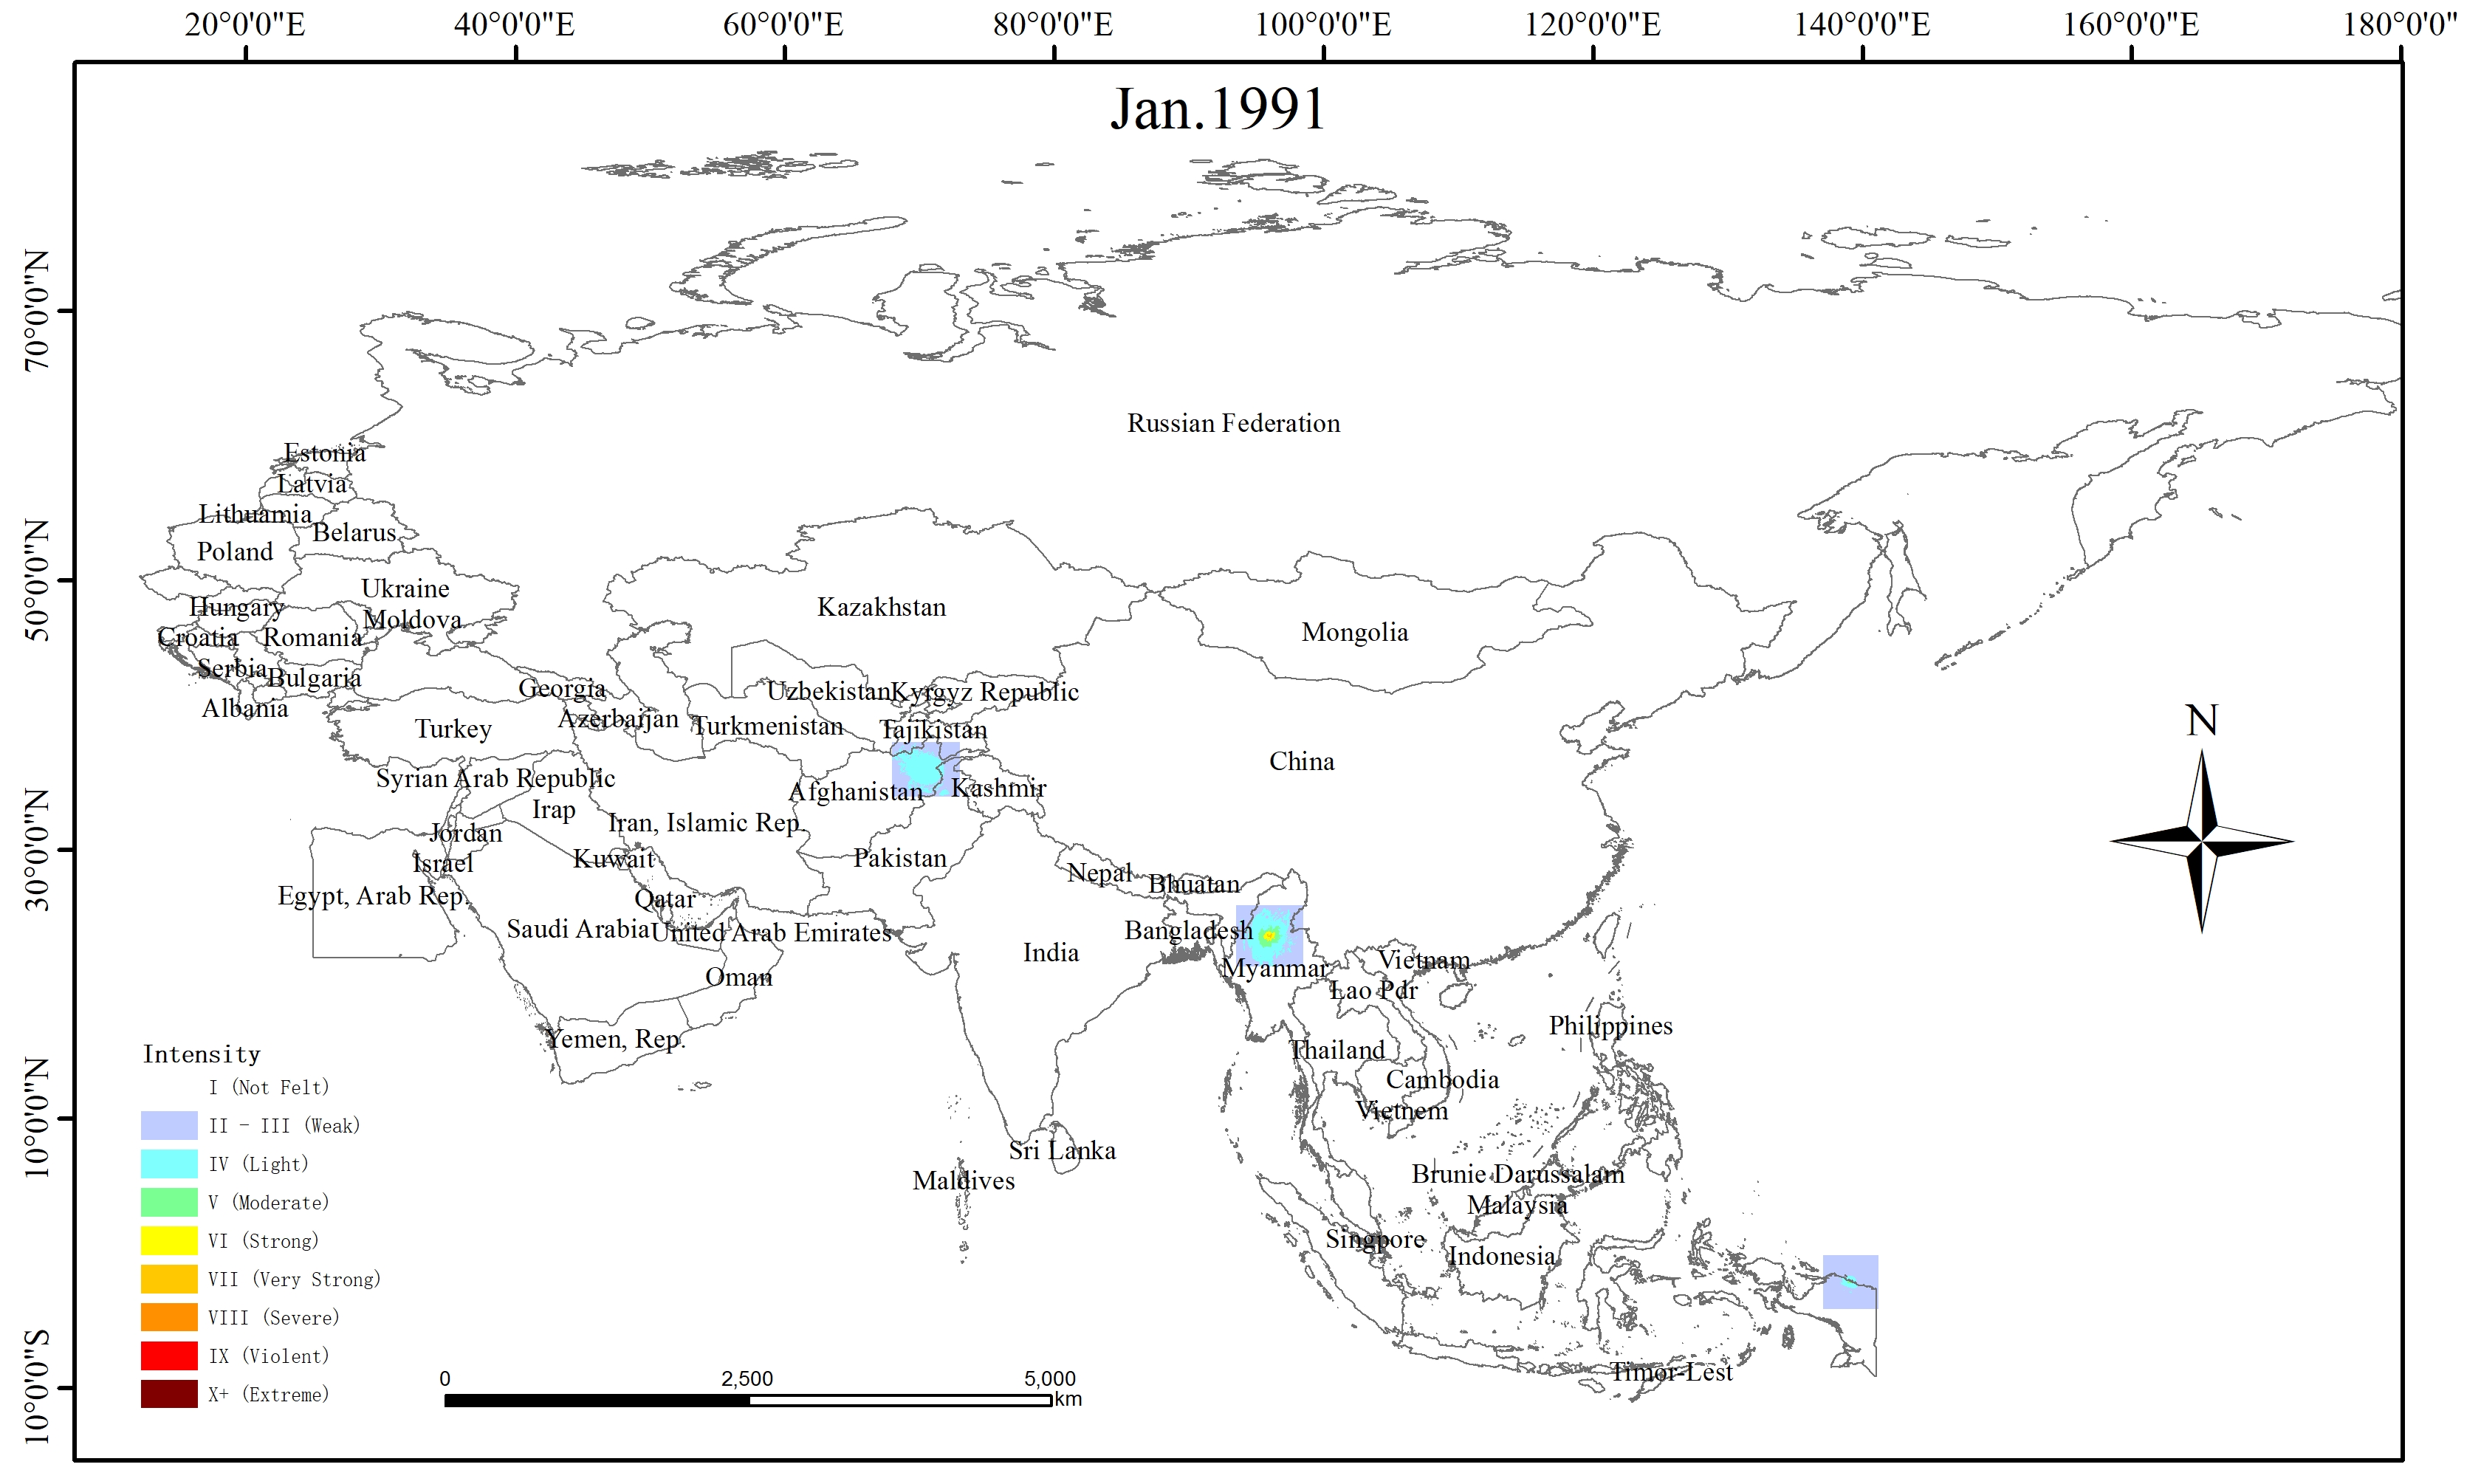 Spatio-temporal Distribution of Earthquake Disaster in the Belt and Road Area in 1991